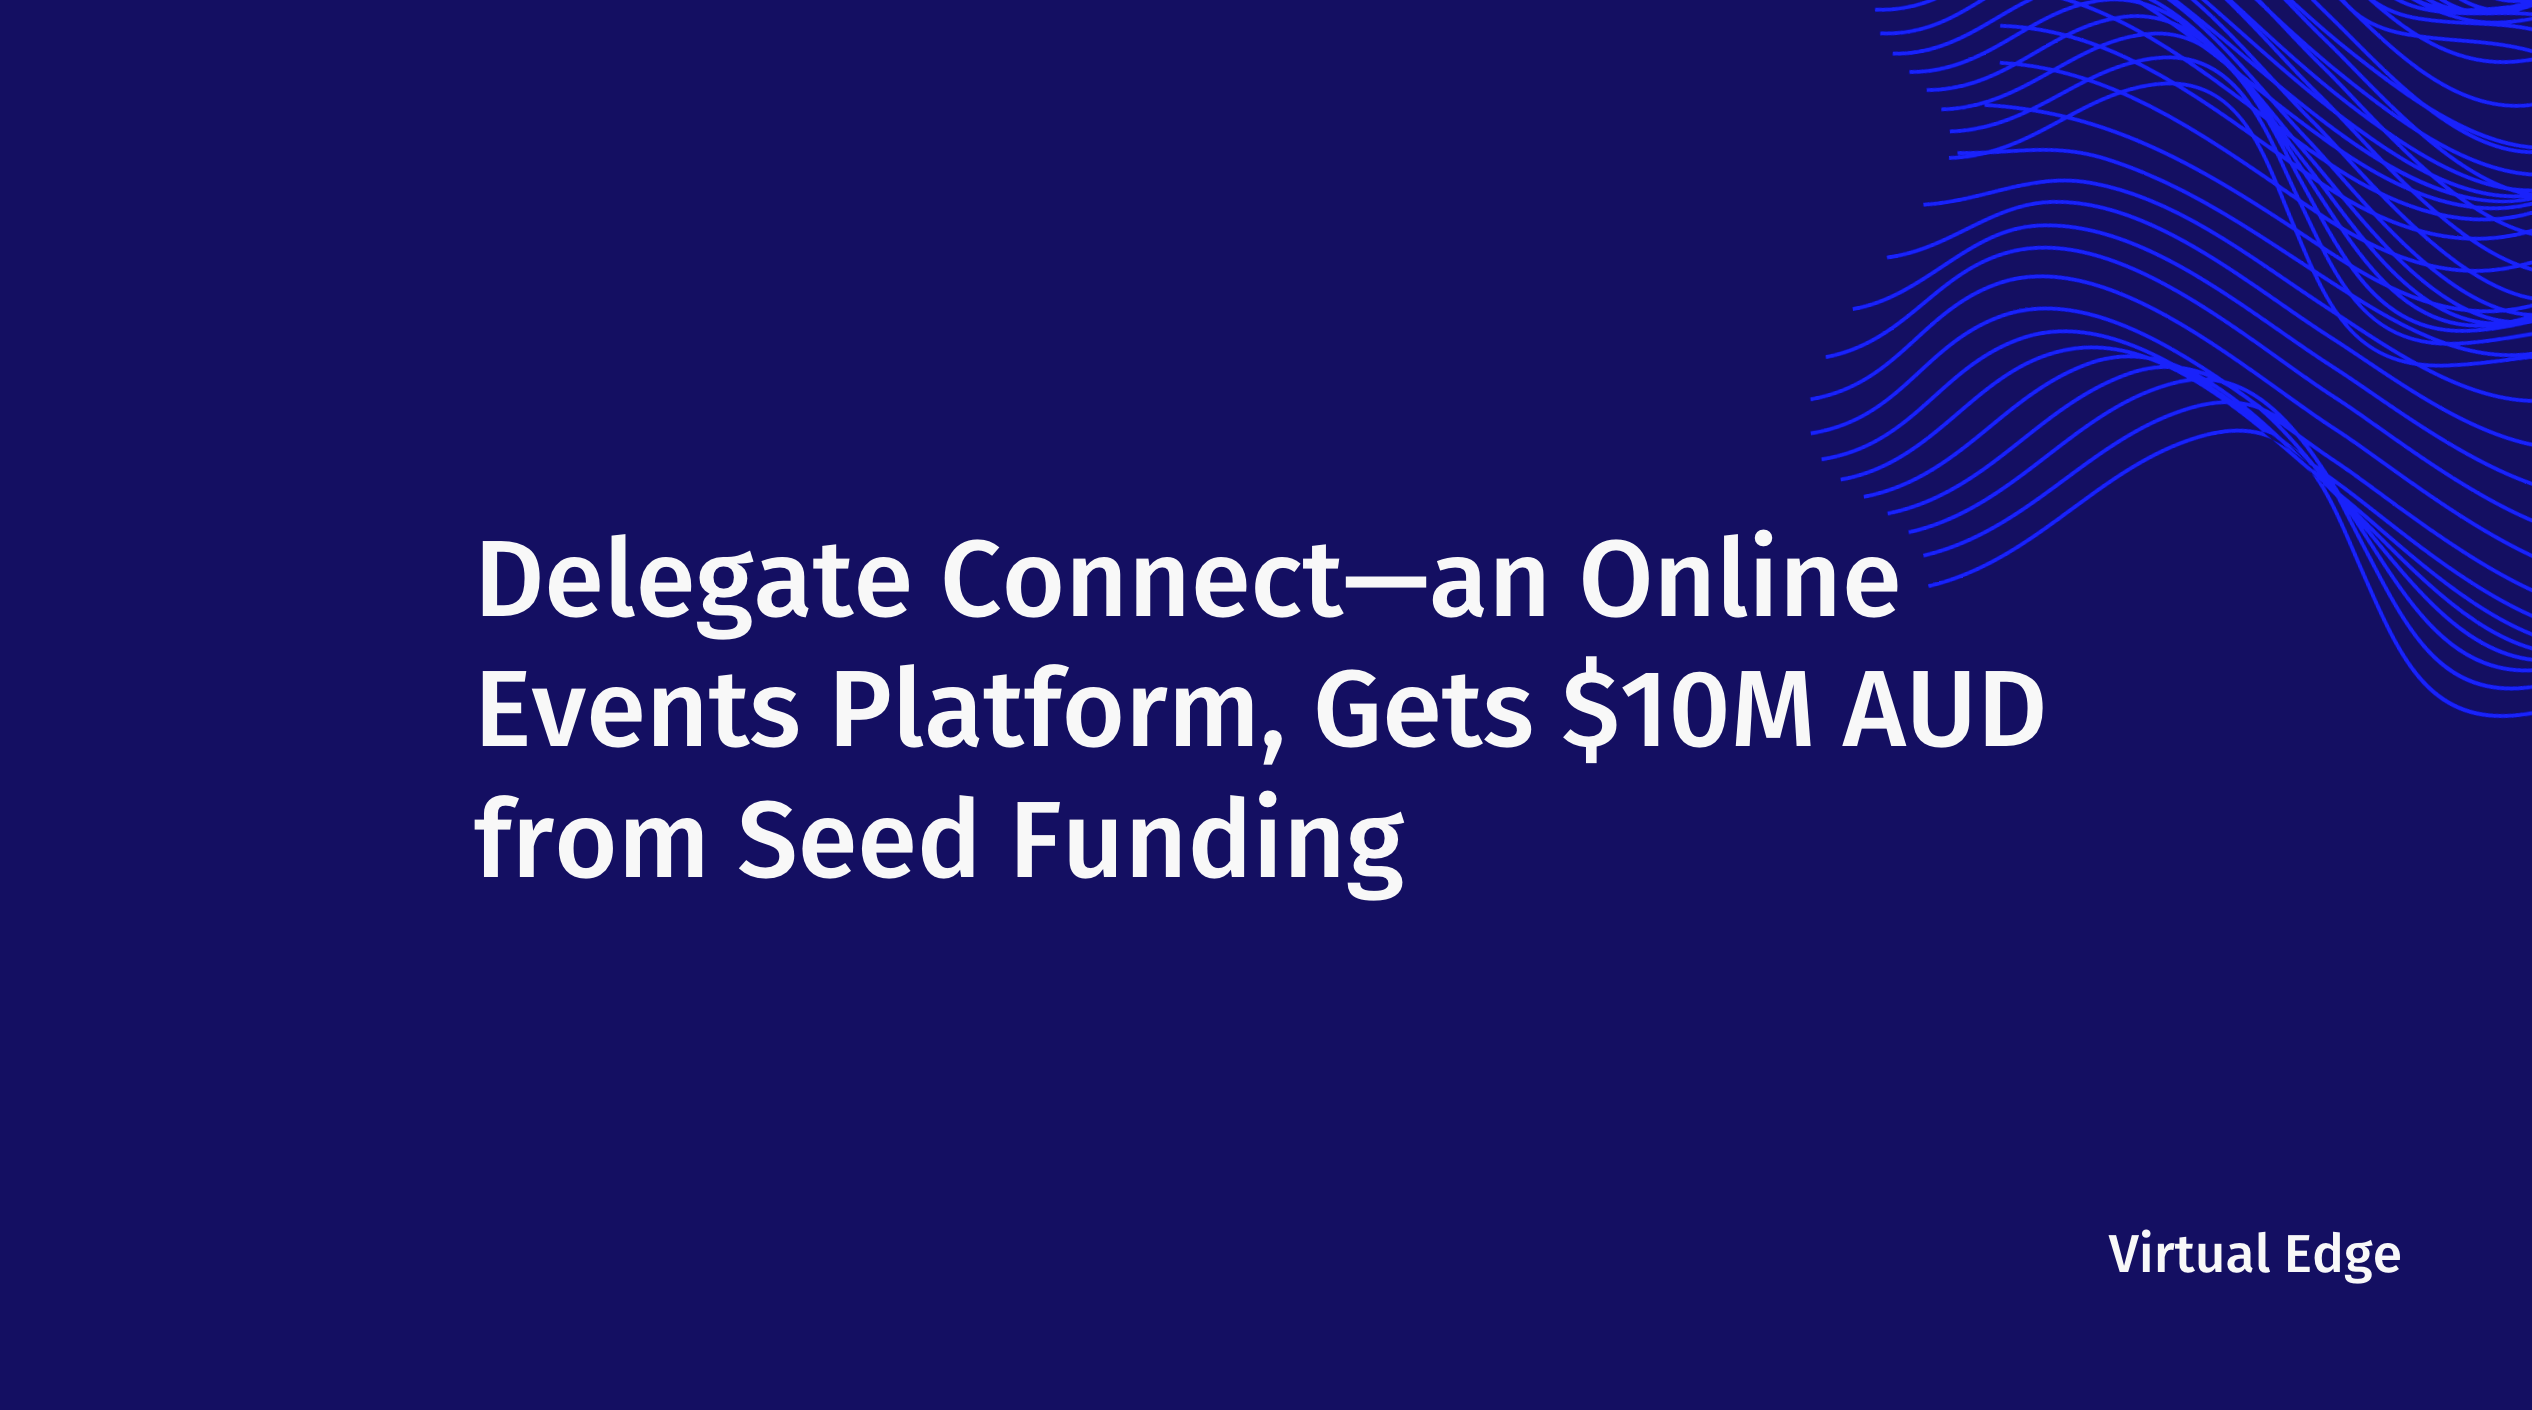 Delegate Connect—an Online Events Platform, Gets $10M AUD from Seed Funding